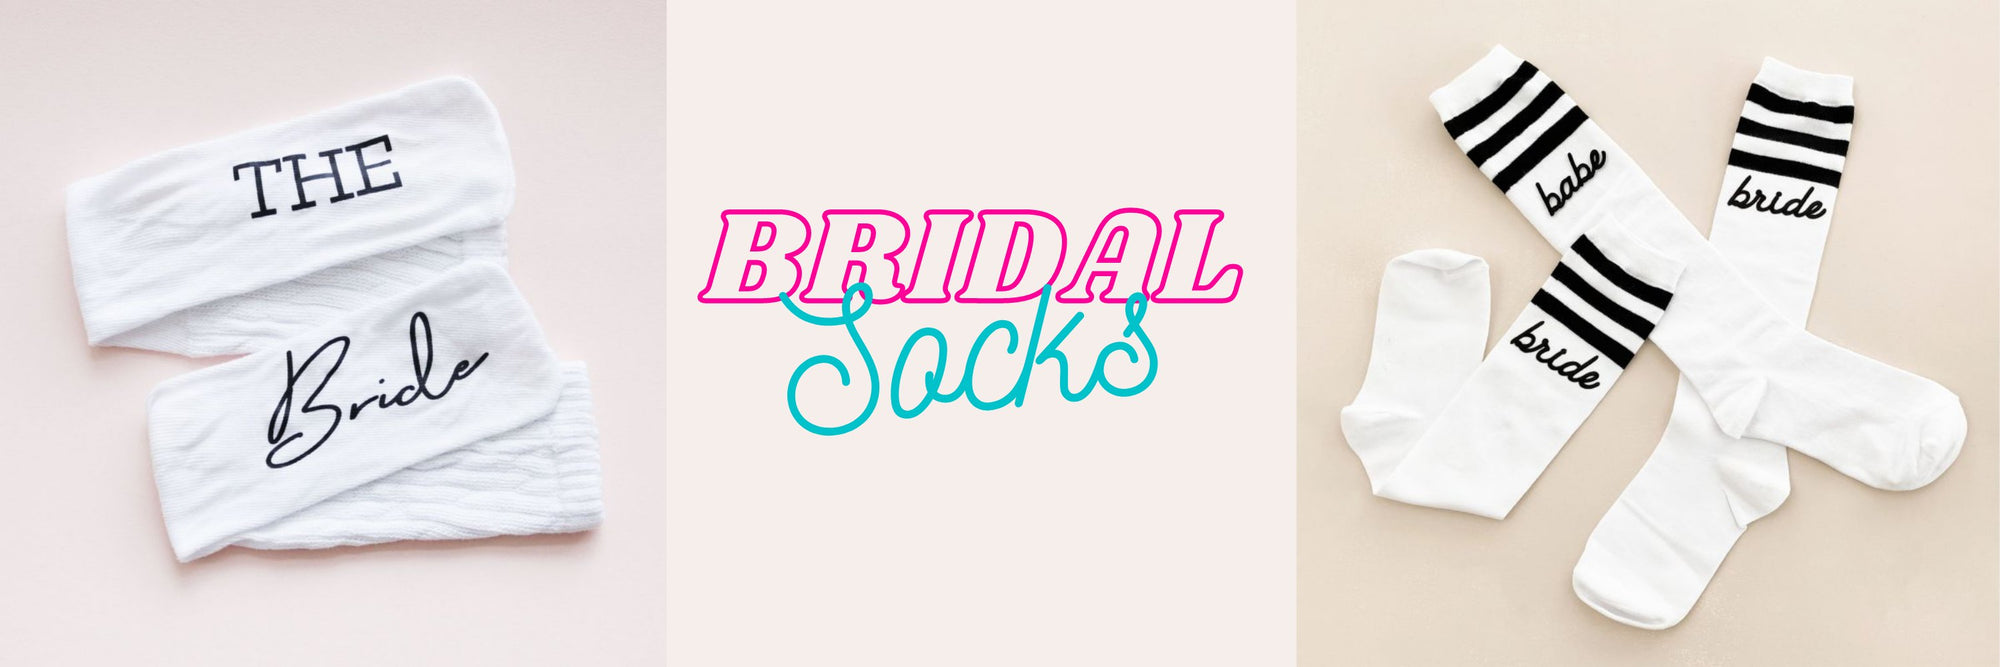 Socks For Bridal Party Gift